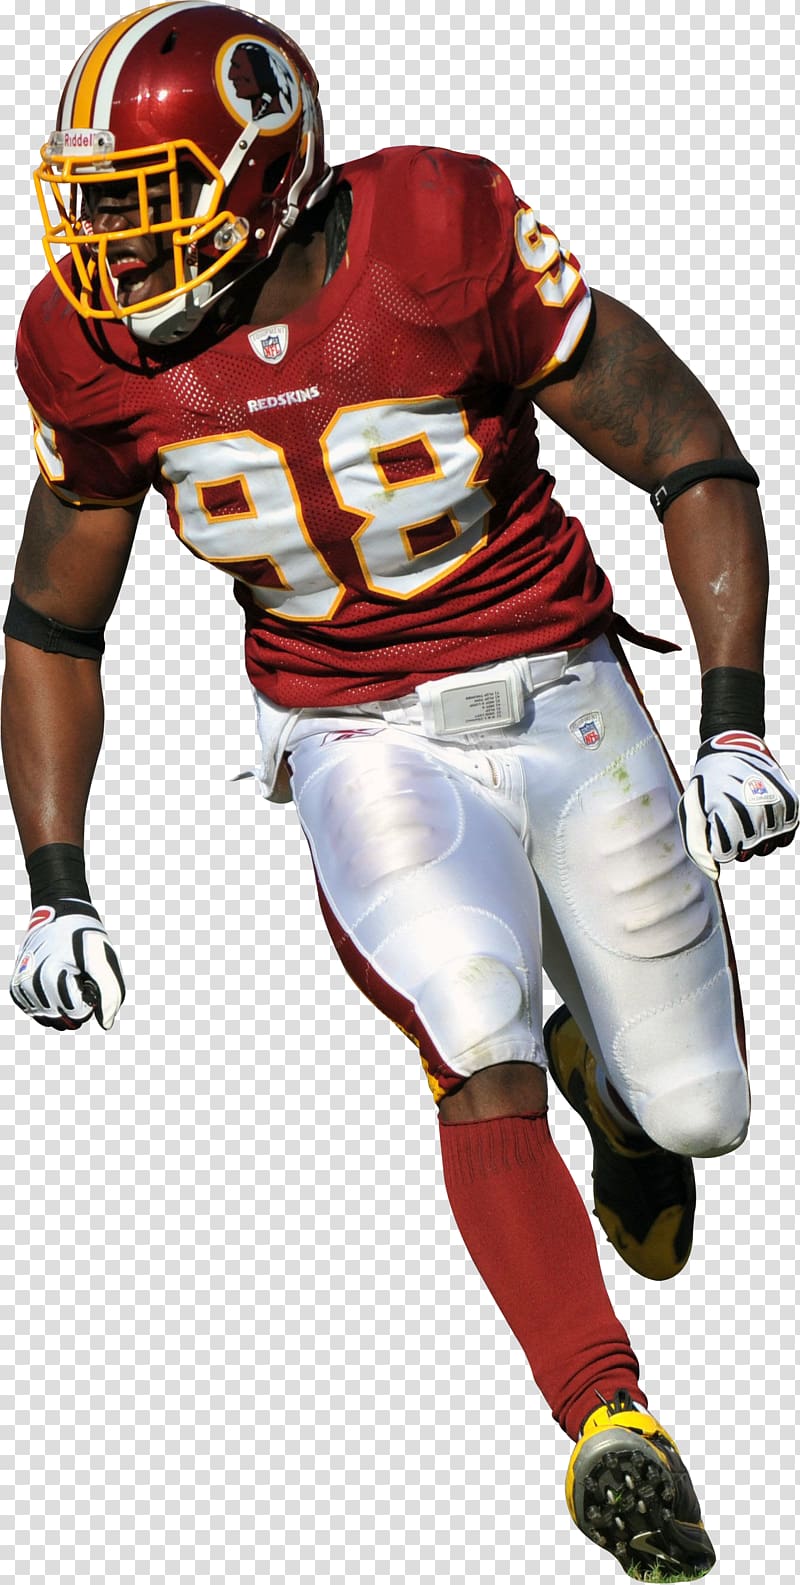 Washington Redskins Protective gear in sports American Football Protective Gear, washington redskins transparent background PNG clipart